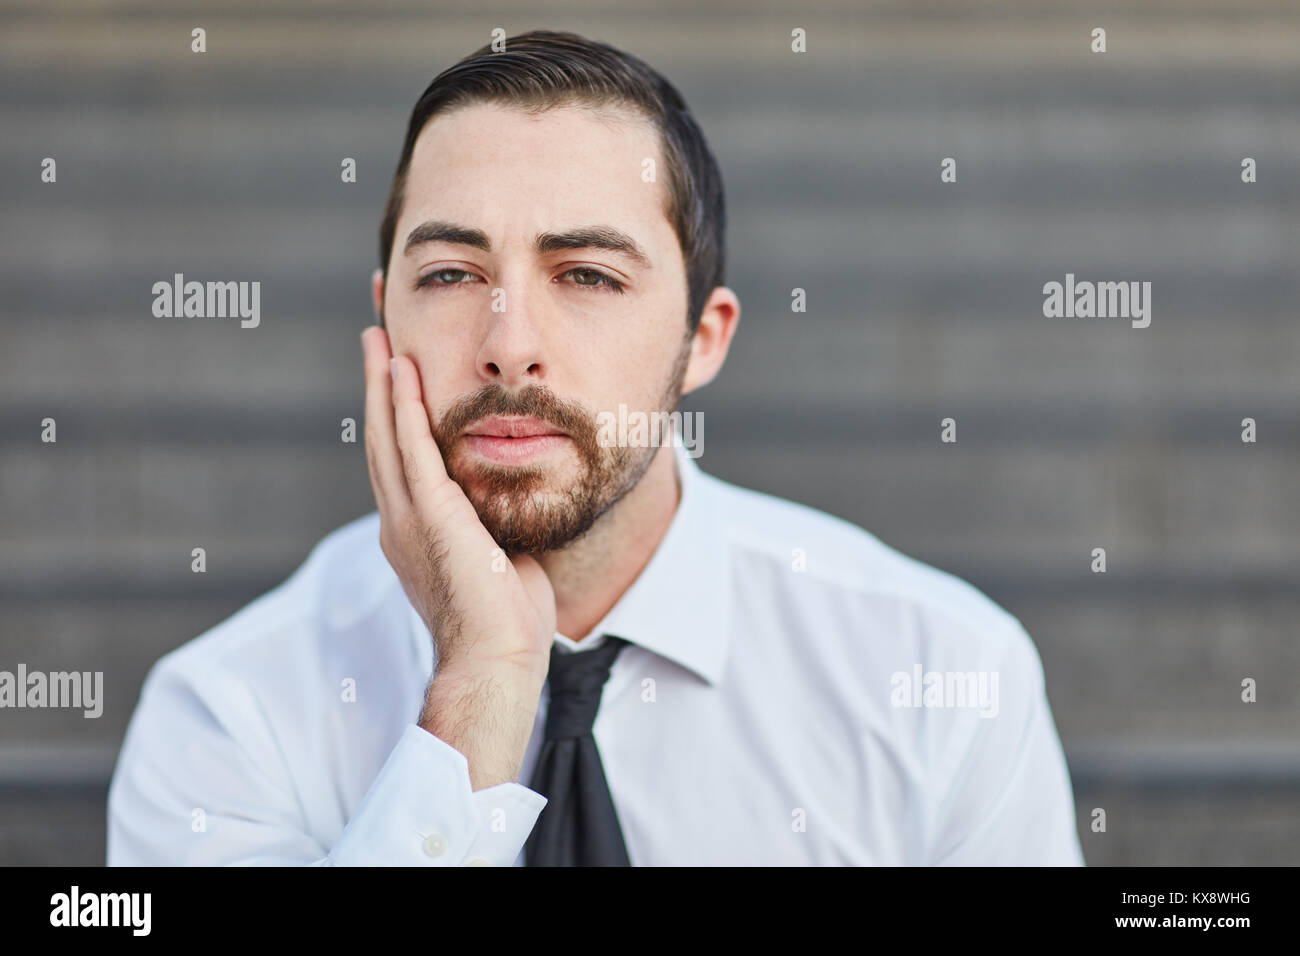 Business man worries about problem and looks pensive Stock Photo